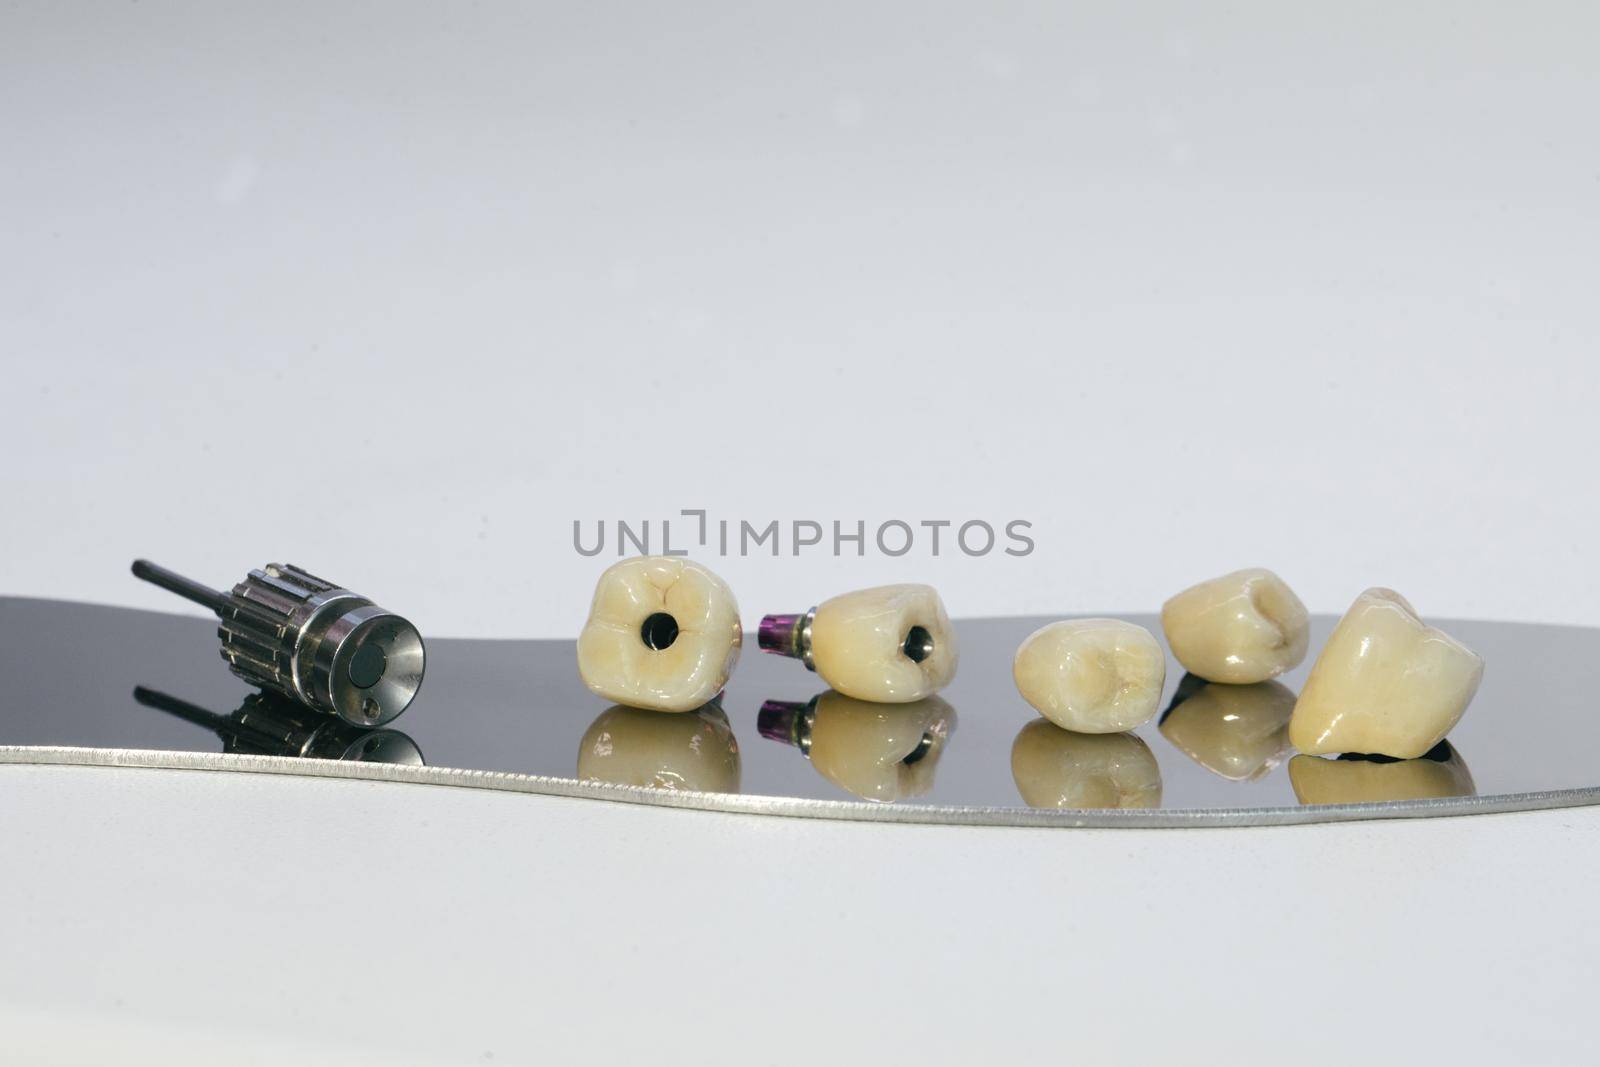 Zirconium crown and zirconium hybrid abutment. Monolithic screw retained zirconium crown on the implant, a screw and a manual key for screwing the crown by uflypro